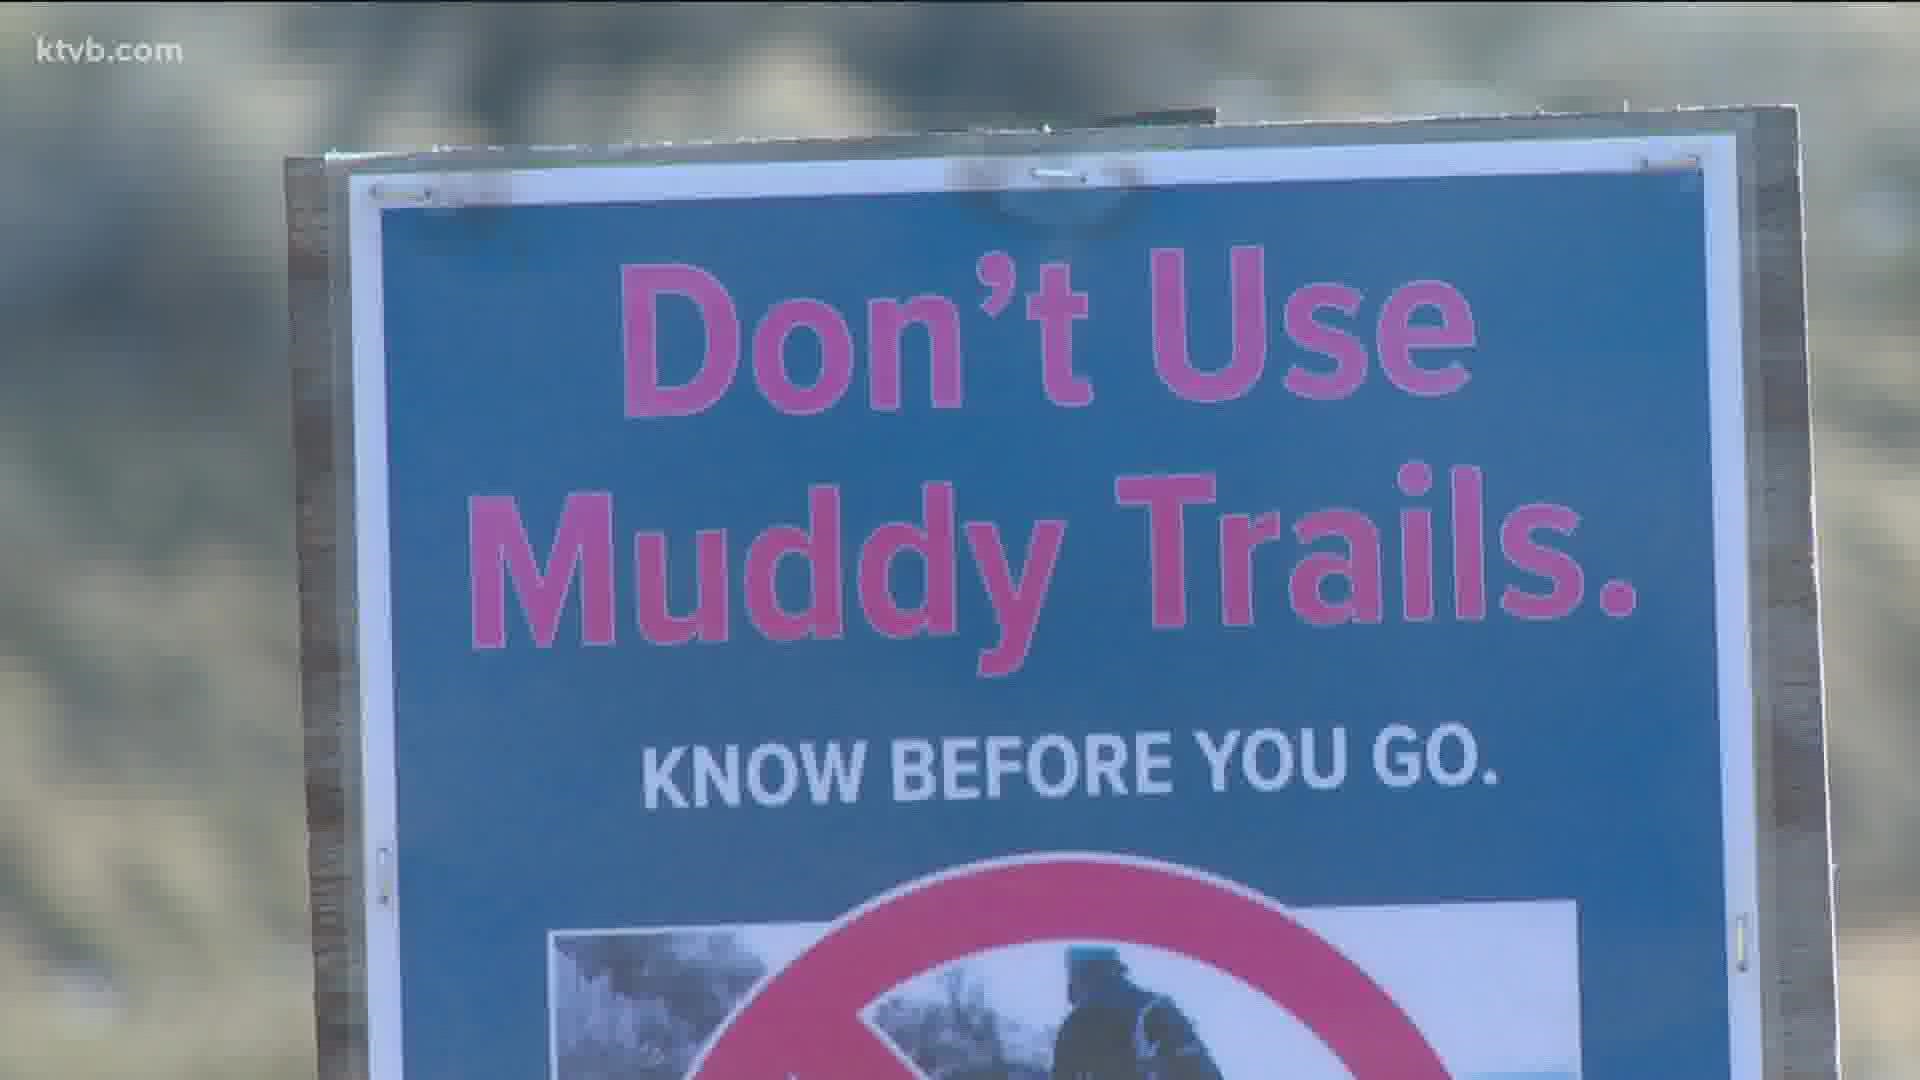 Hiking or riding through muddy sections of the trail can cause ruts and significant damage.